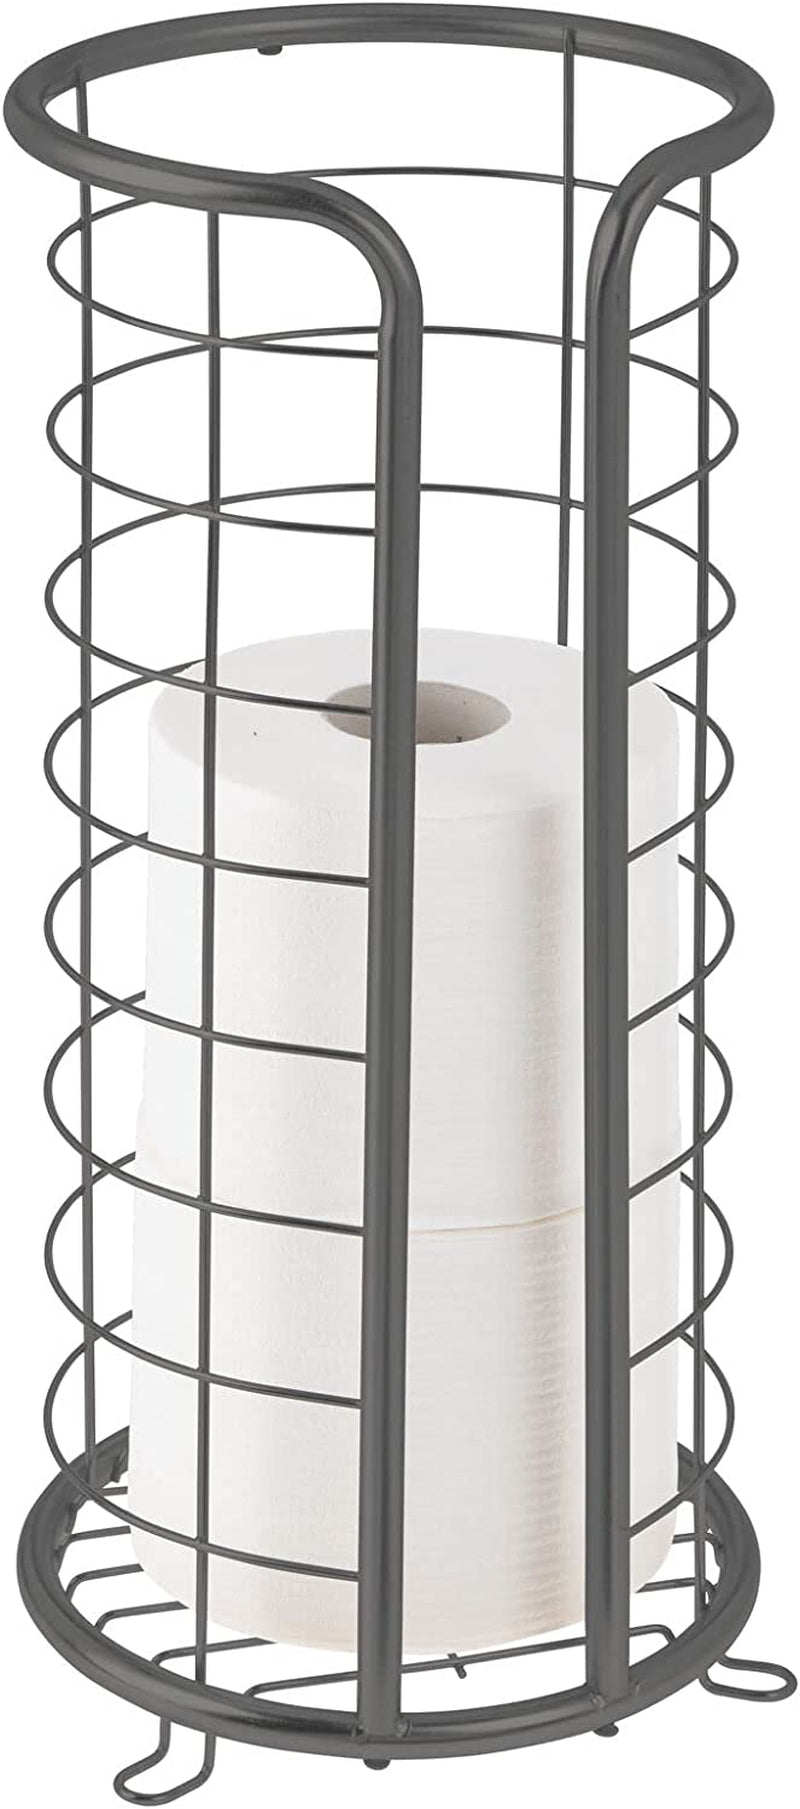 mDesign, Mdesign Metal Free Stand Toilet Paper Organizer Stand, 3 Rolls of Toilet Tissue Storage, Bathroom Decor Accessory - under Sink, Vanity, or inside Cabinet Shelf, Omni Collection, Graphite Gray